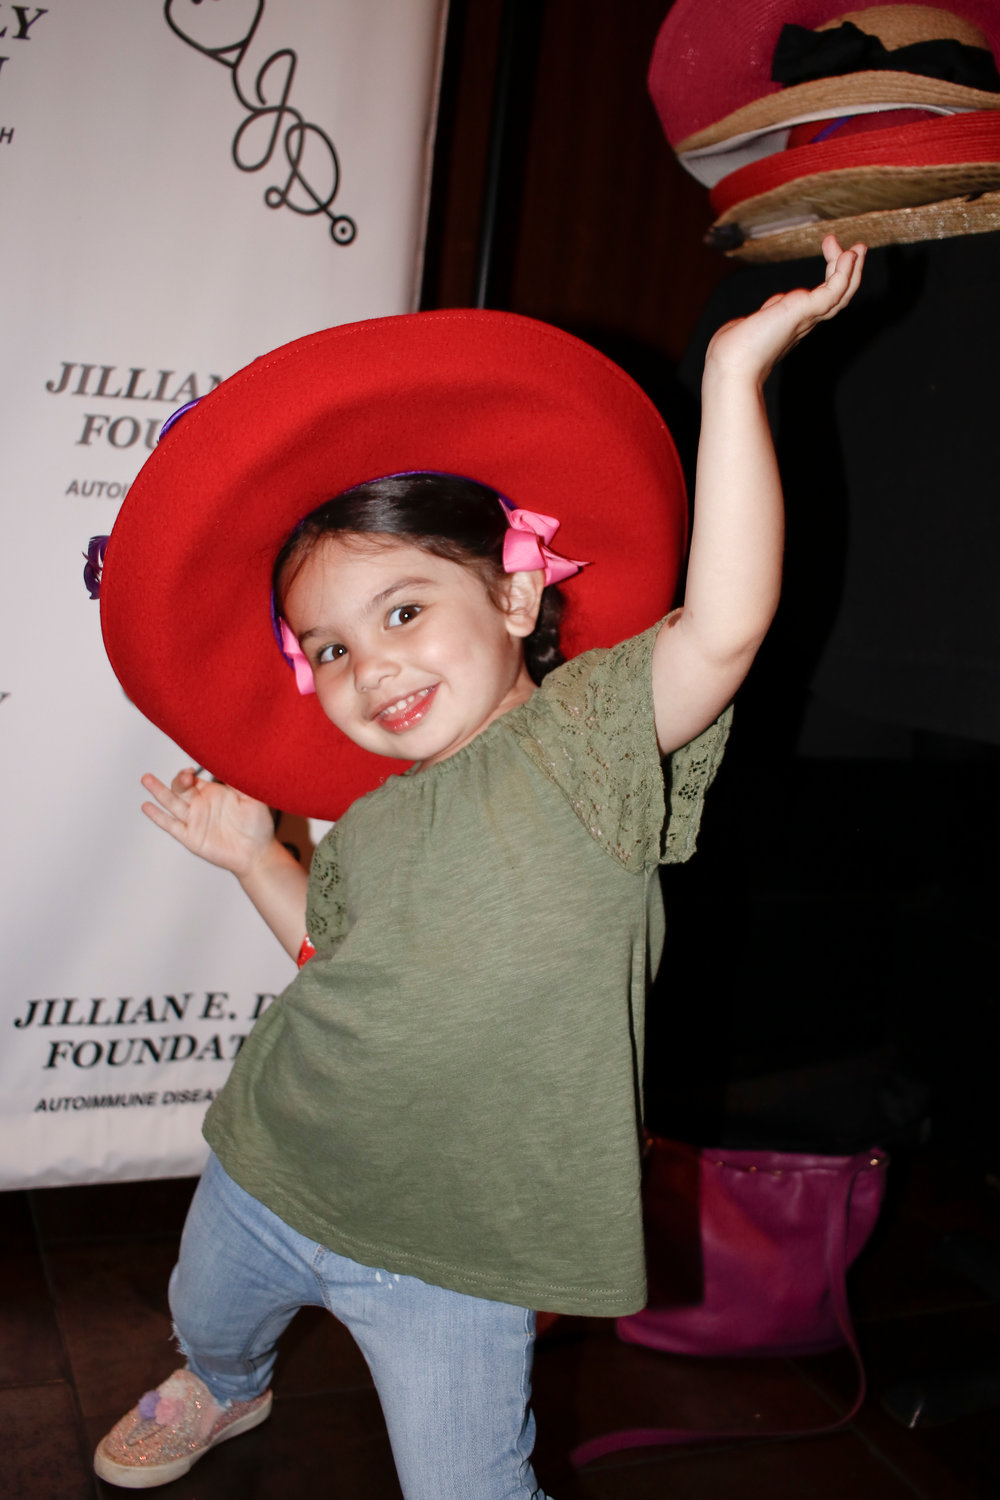 Avianna Durante, 3, modeled a fun hat at the photo booth.